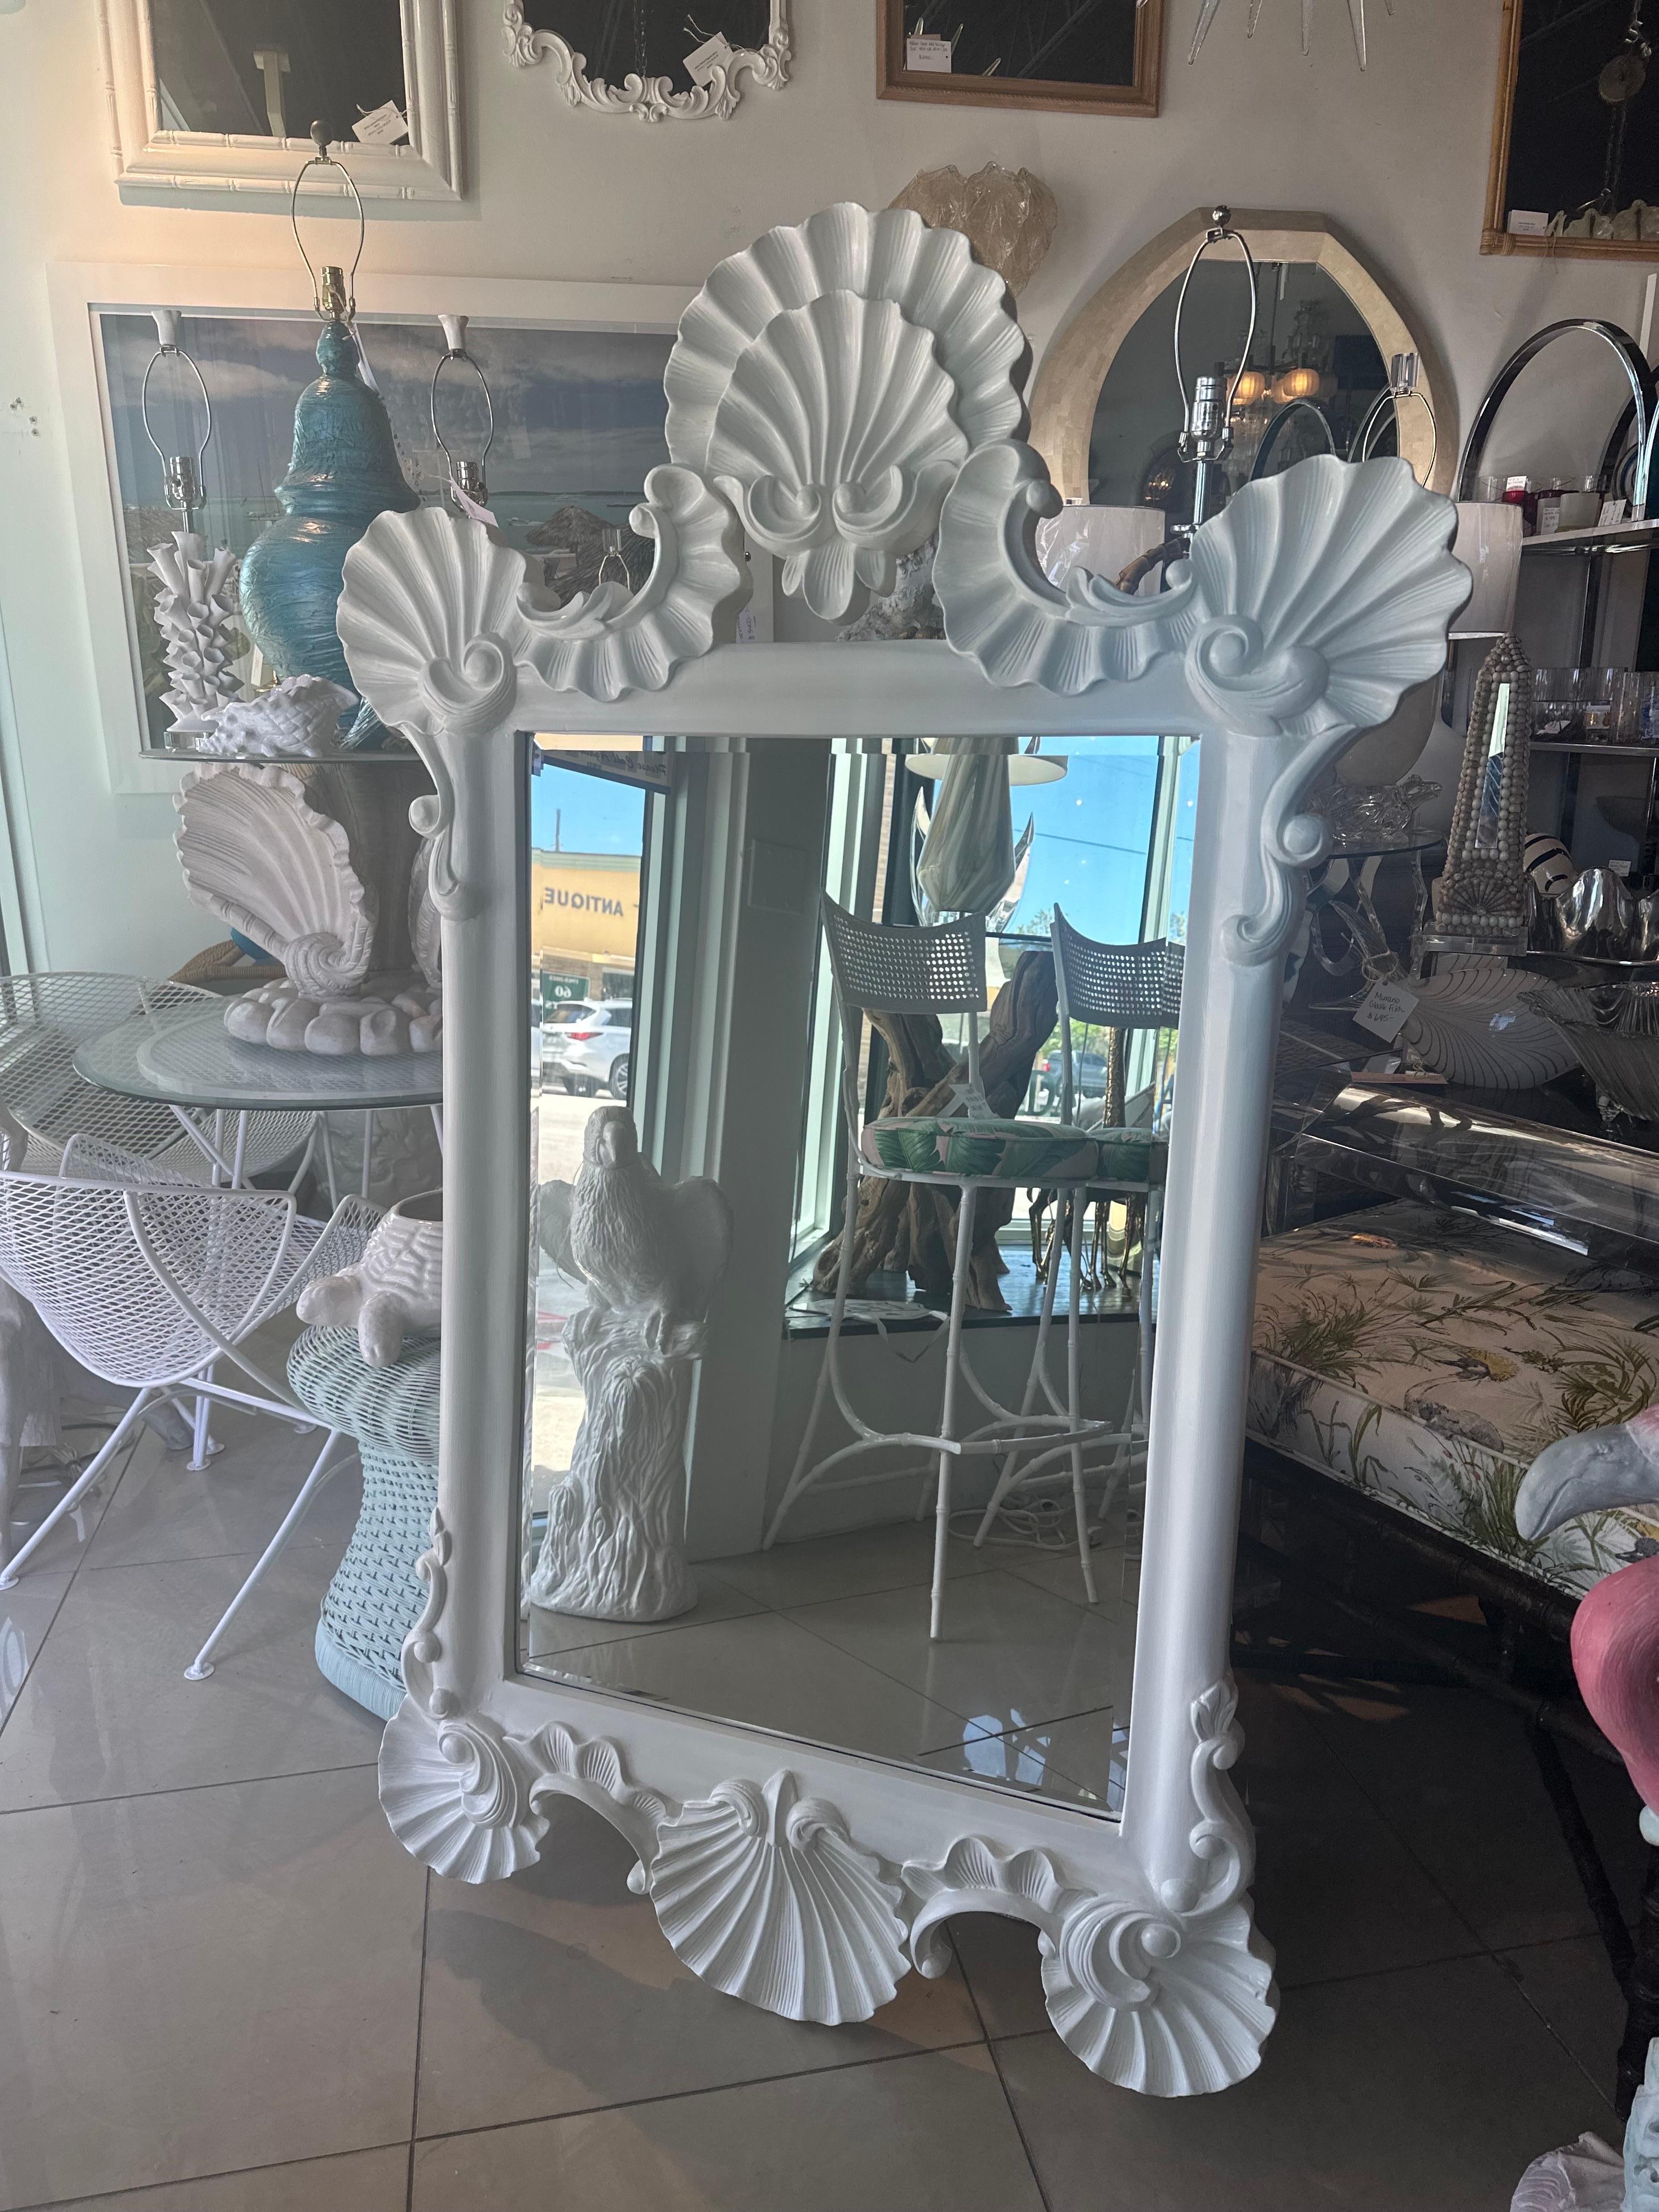 The most beautiful vintage seashell shell Palm Beach large ornate wall mirror. Newly lacquered in a soft white satin. New mounting hardware installed. Dimensions: 61 H x 37.5 W x 2.5 D. 